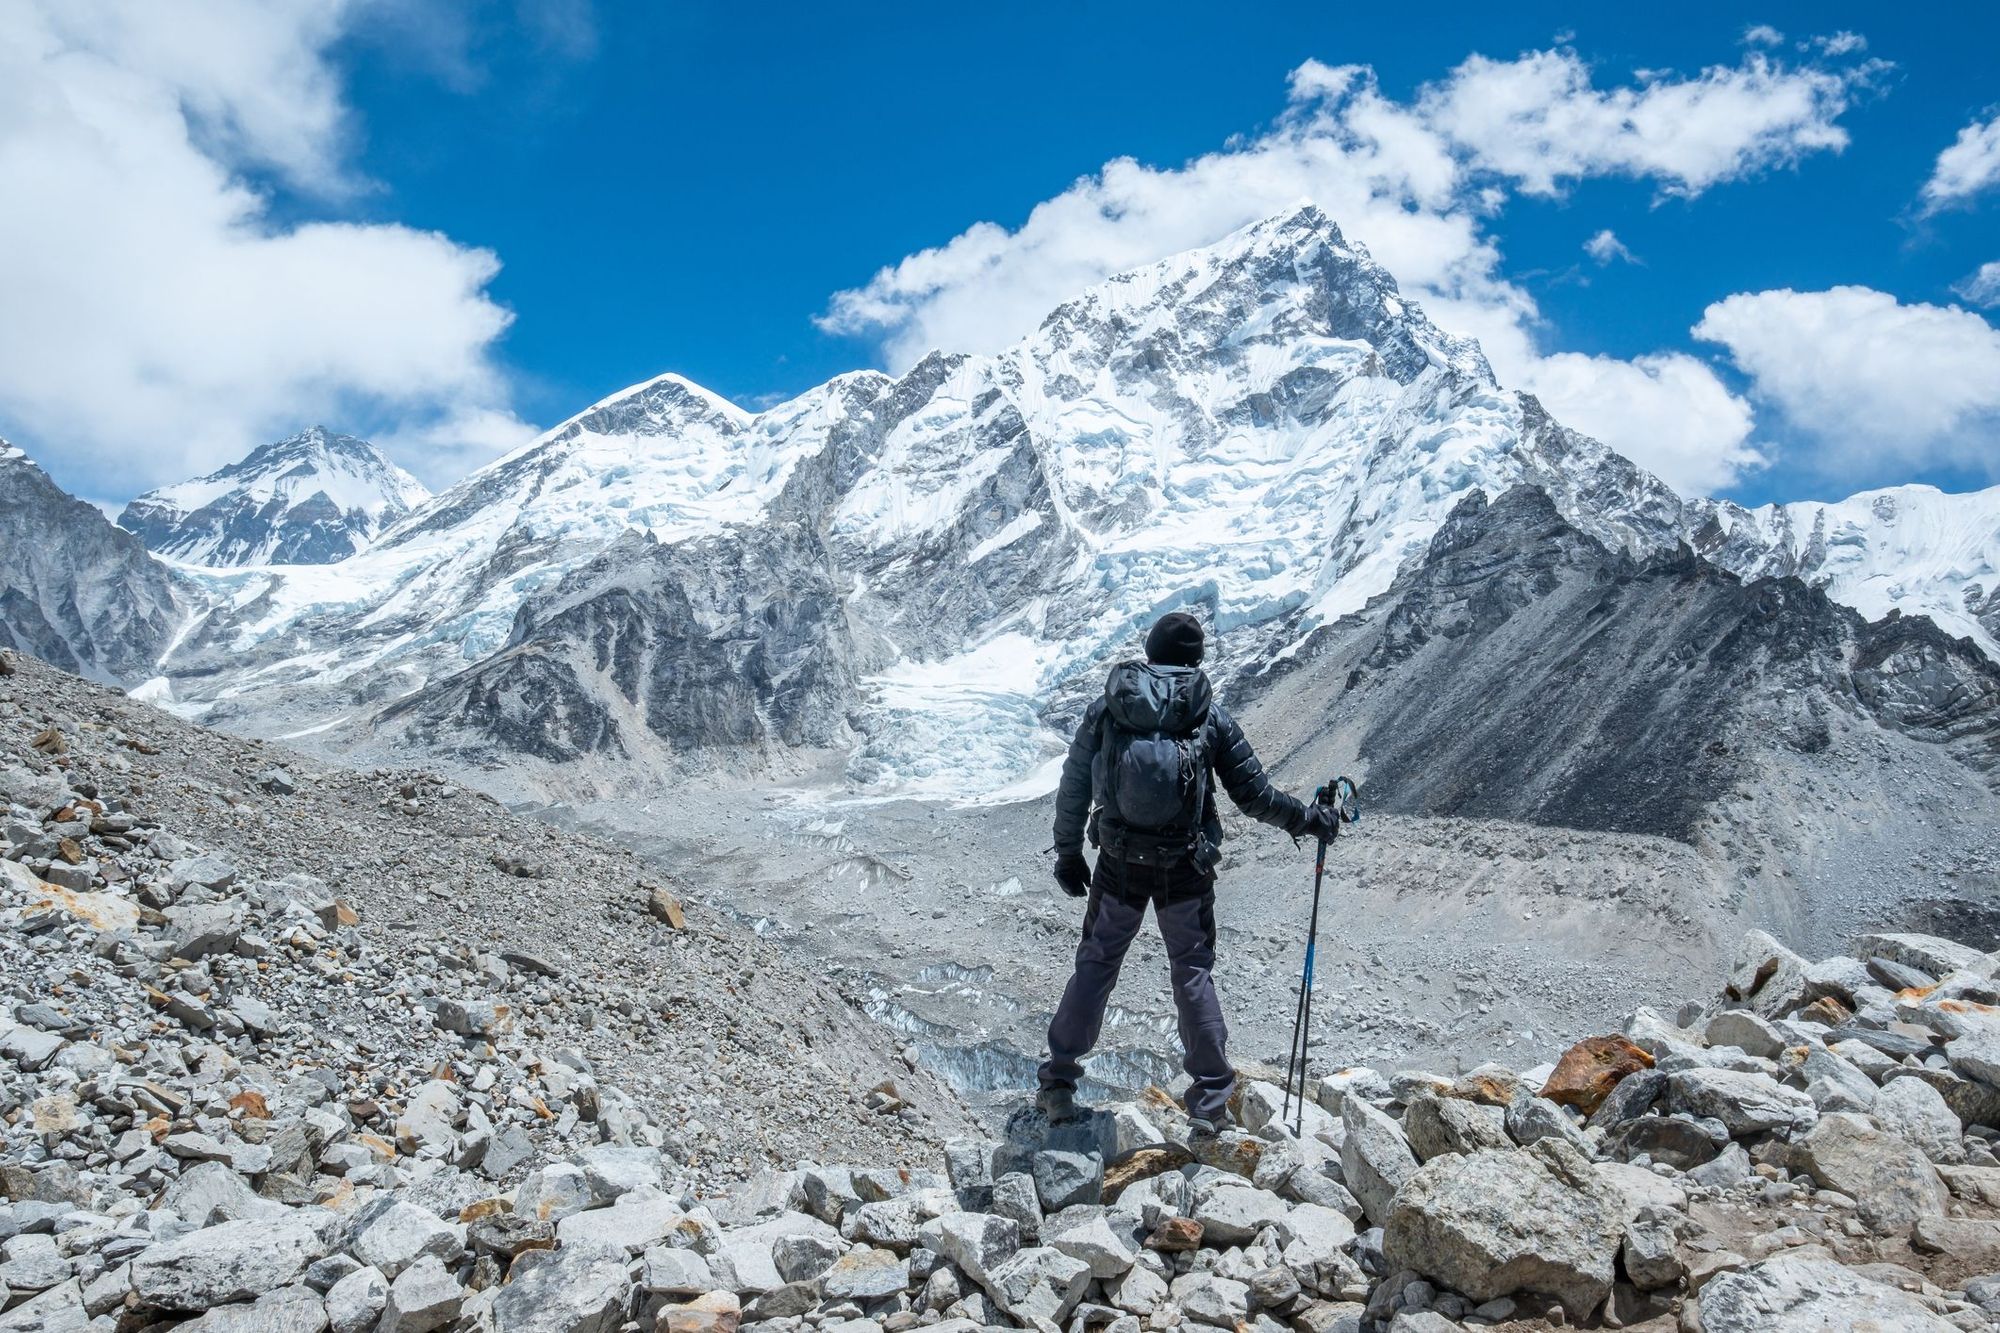 Male backpacker enjoying the view on mountain walk in Himalayas. Everest Base Camp trail route